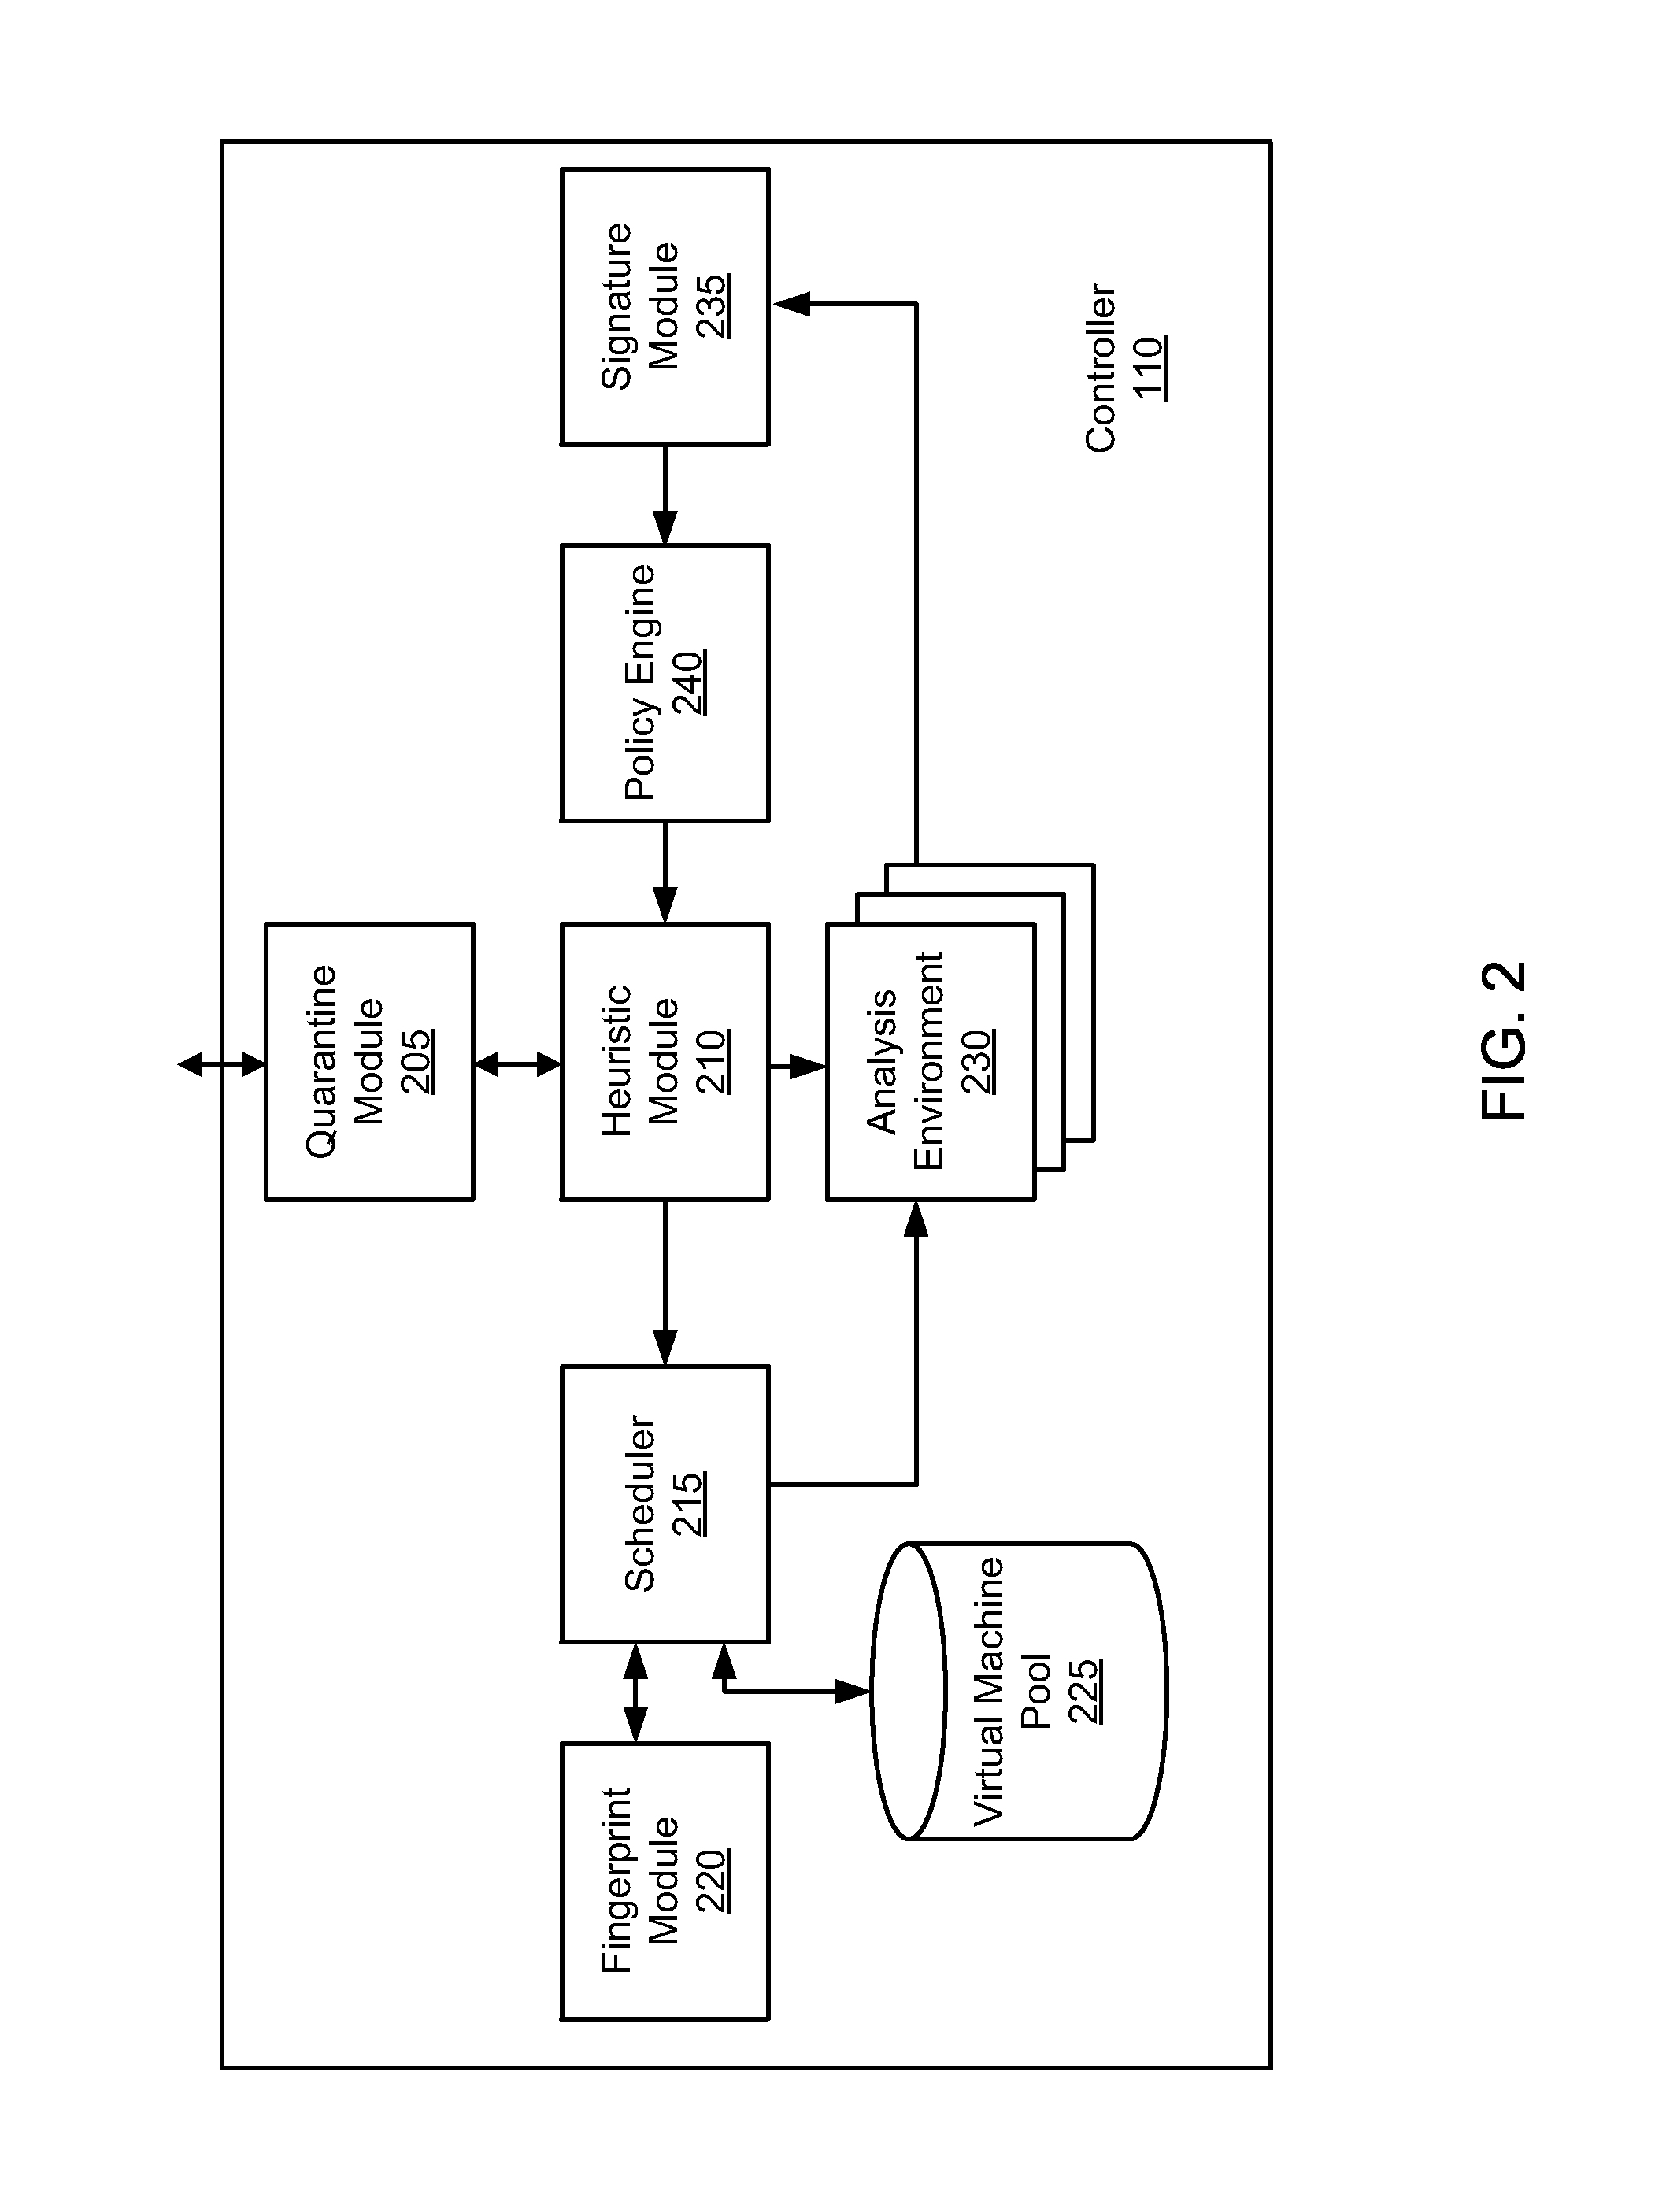 System and method for malware containment